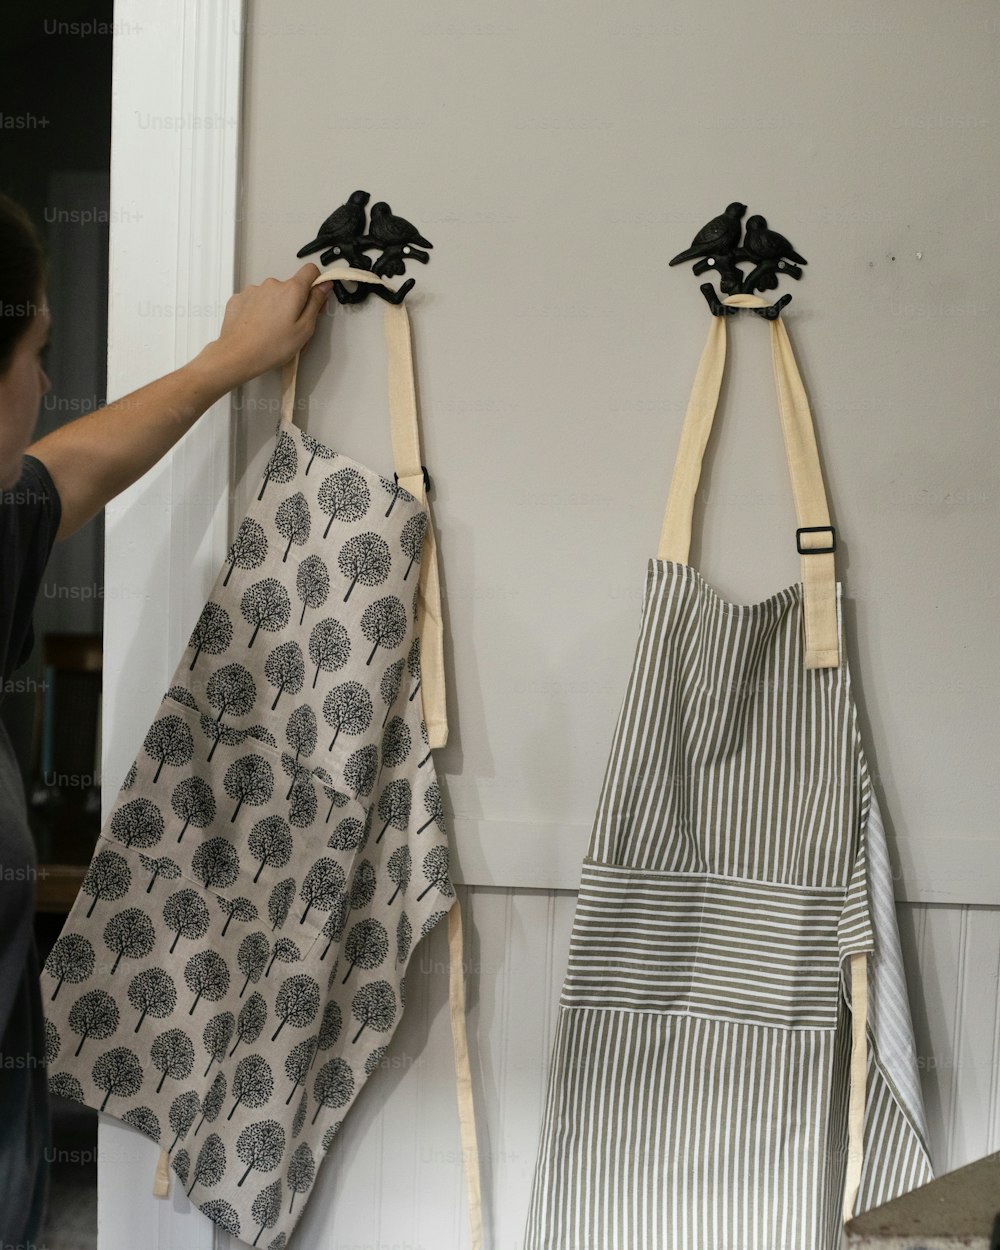 two aprons hanging on a wall next to each other